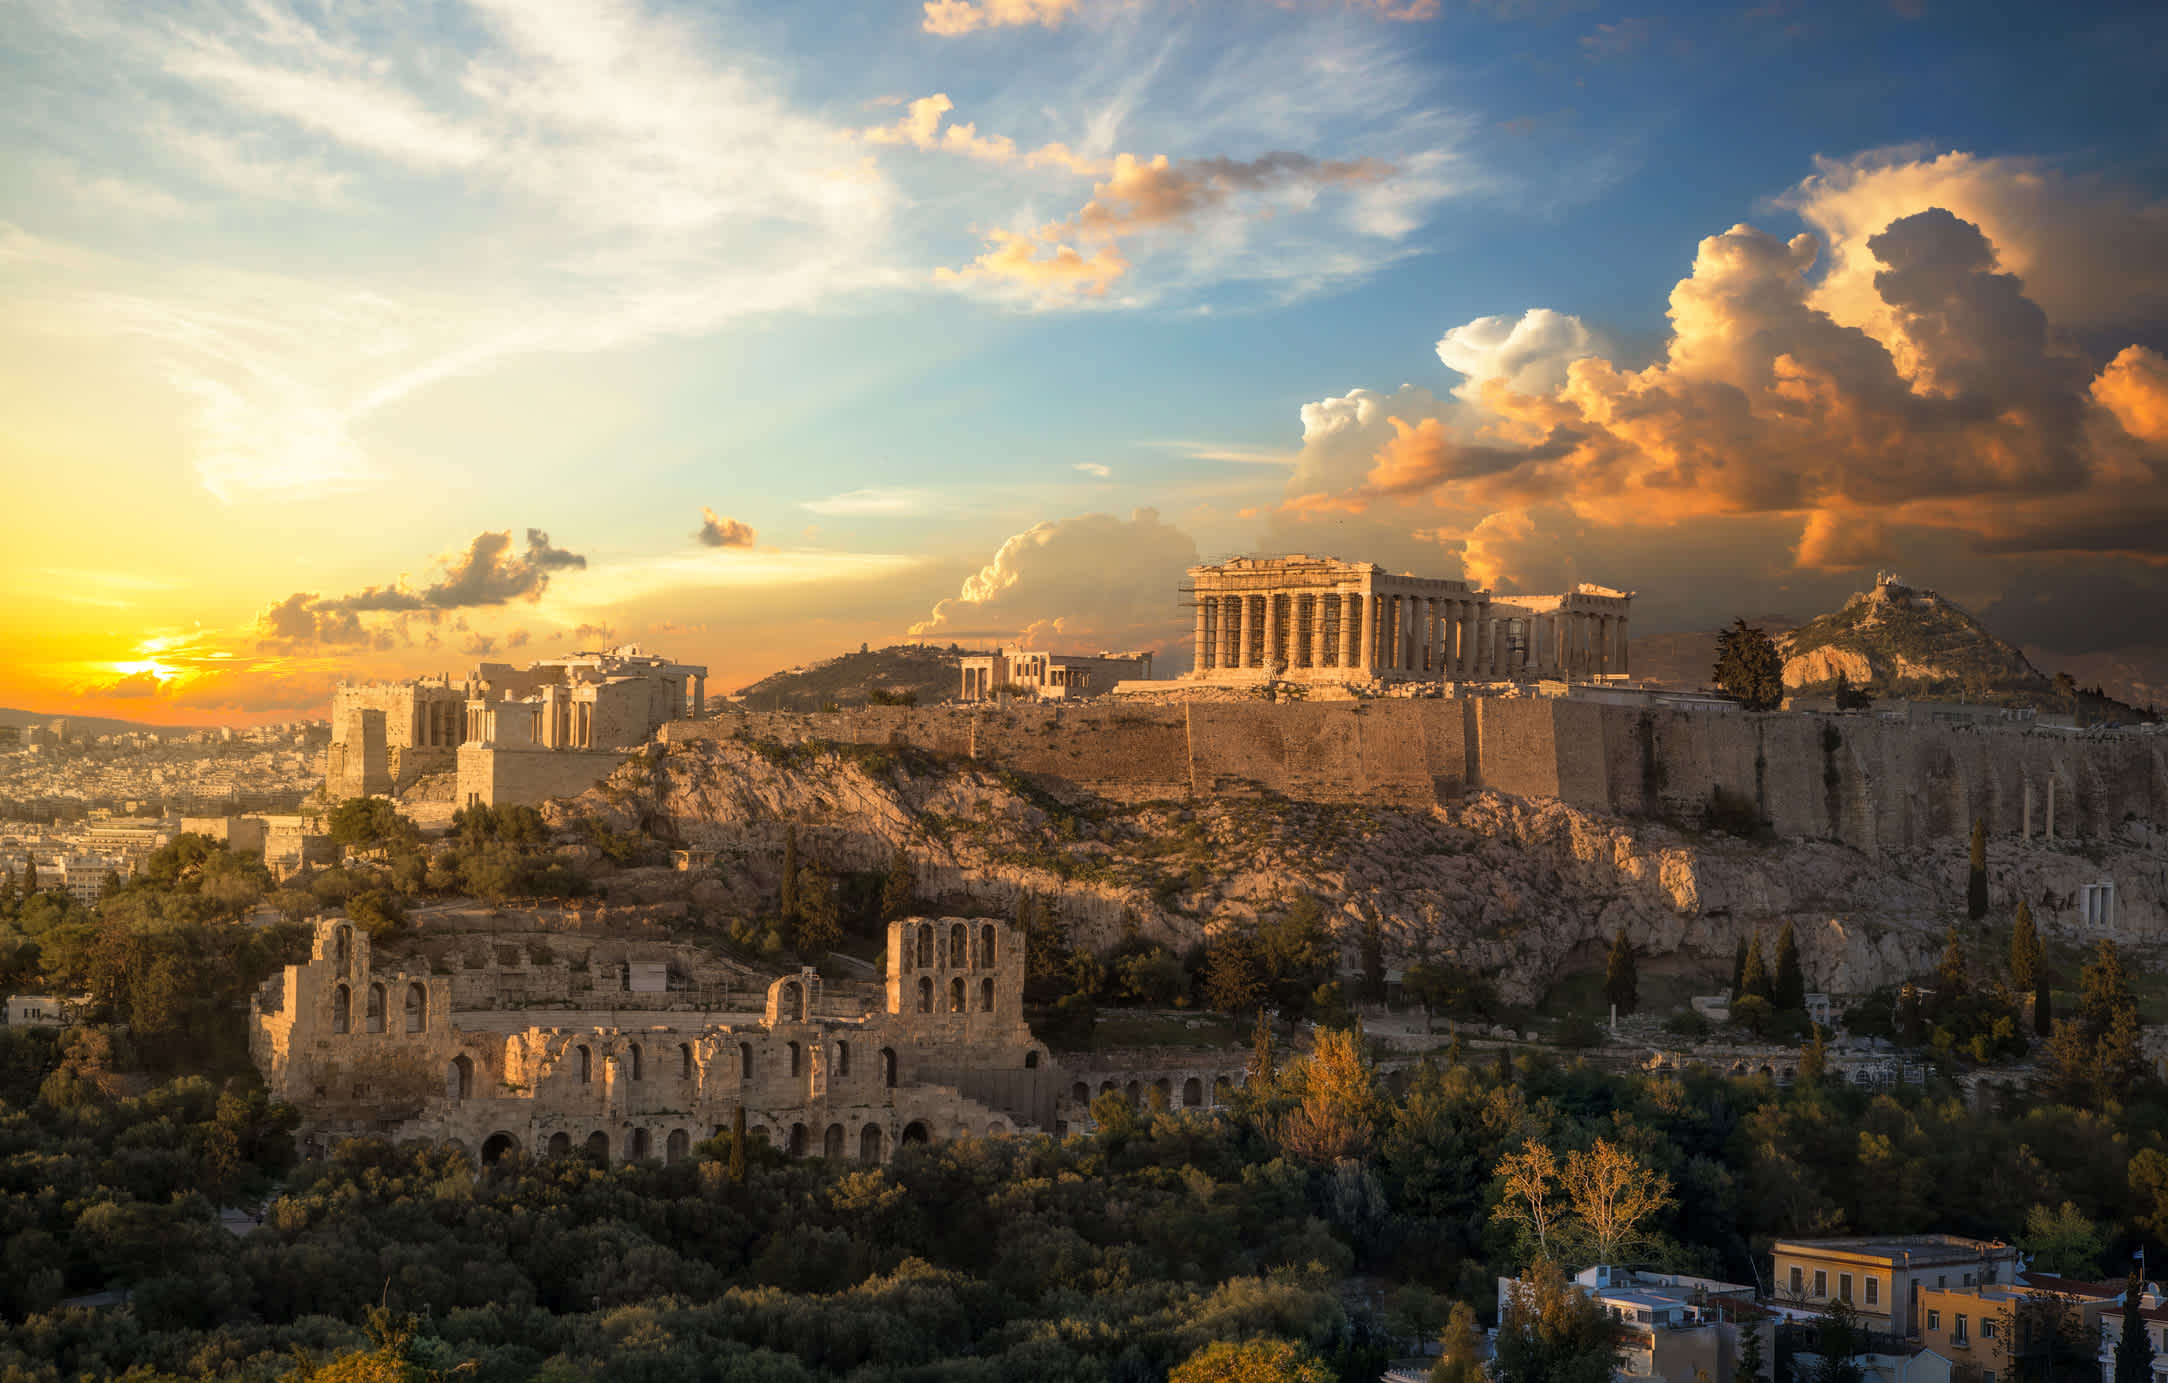 See the Acropolis of Athens, pictured here, on a tour of Greece